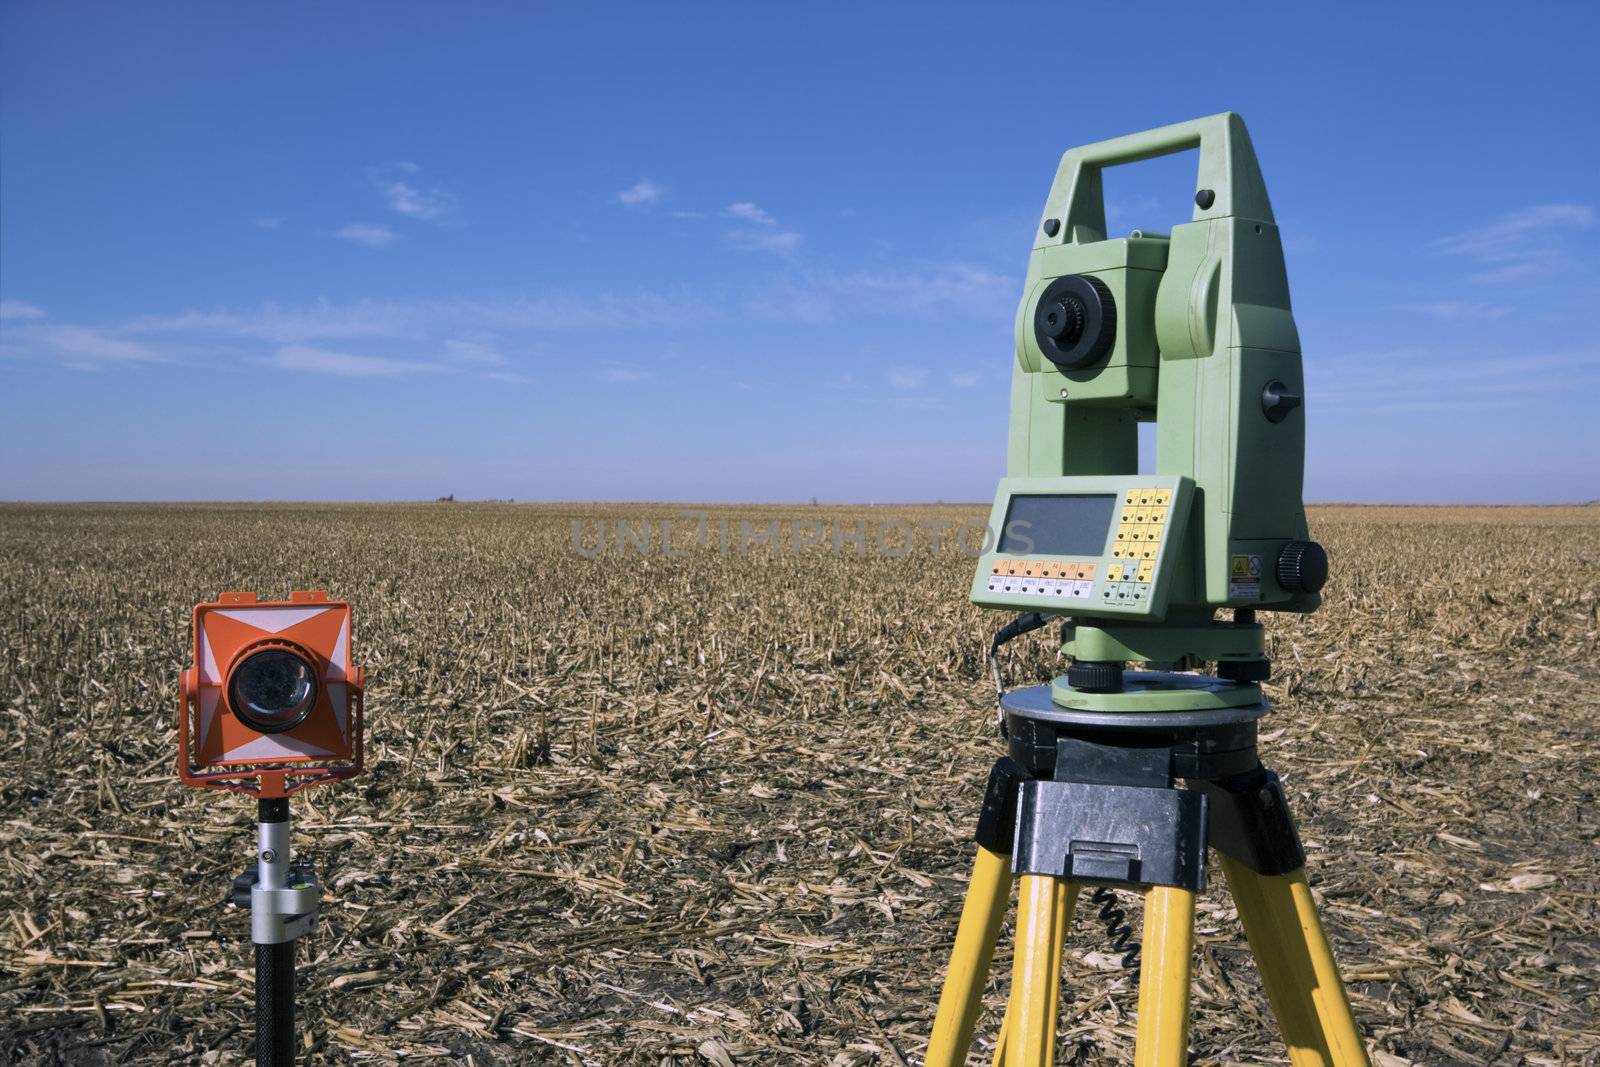 Surveying Equipment in the field by benkrut